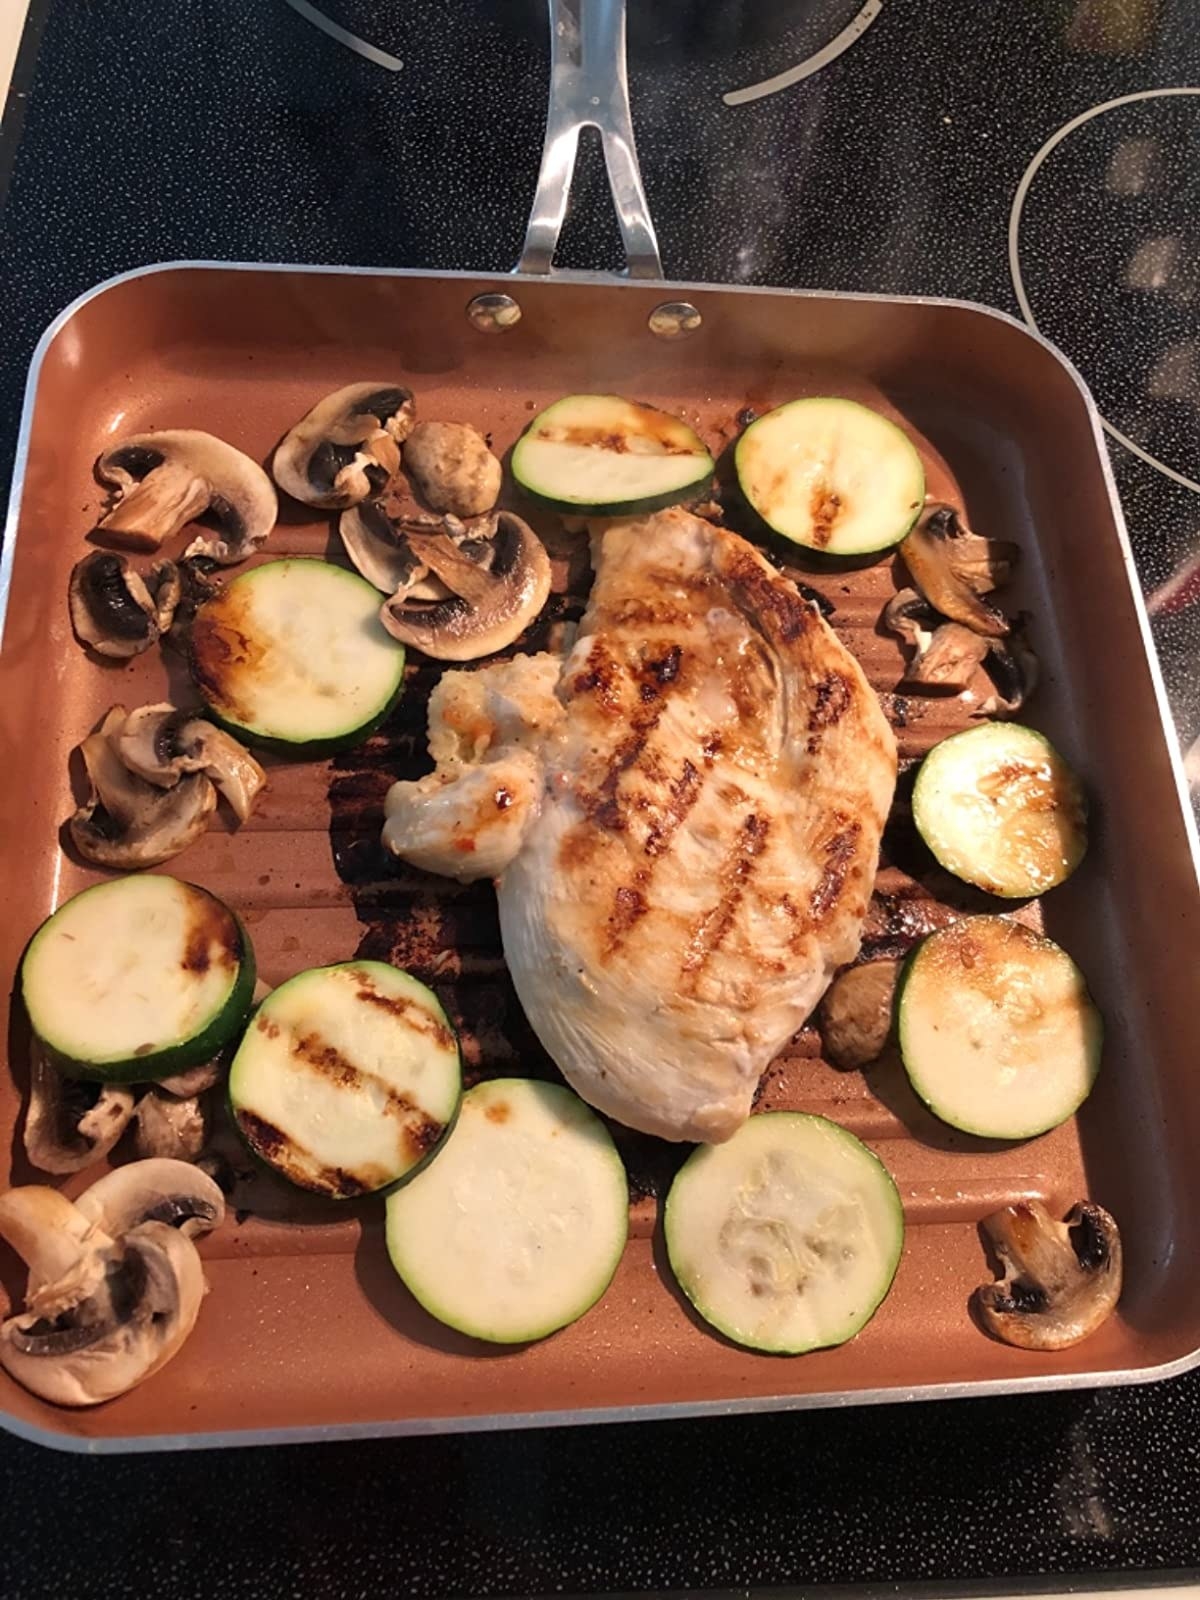 The square pan cooking chicken and vegetables